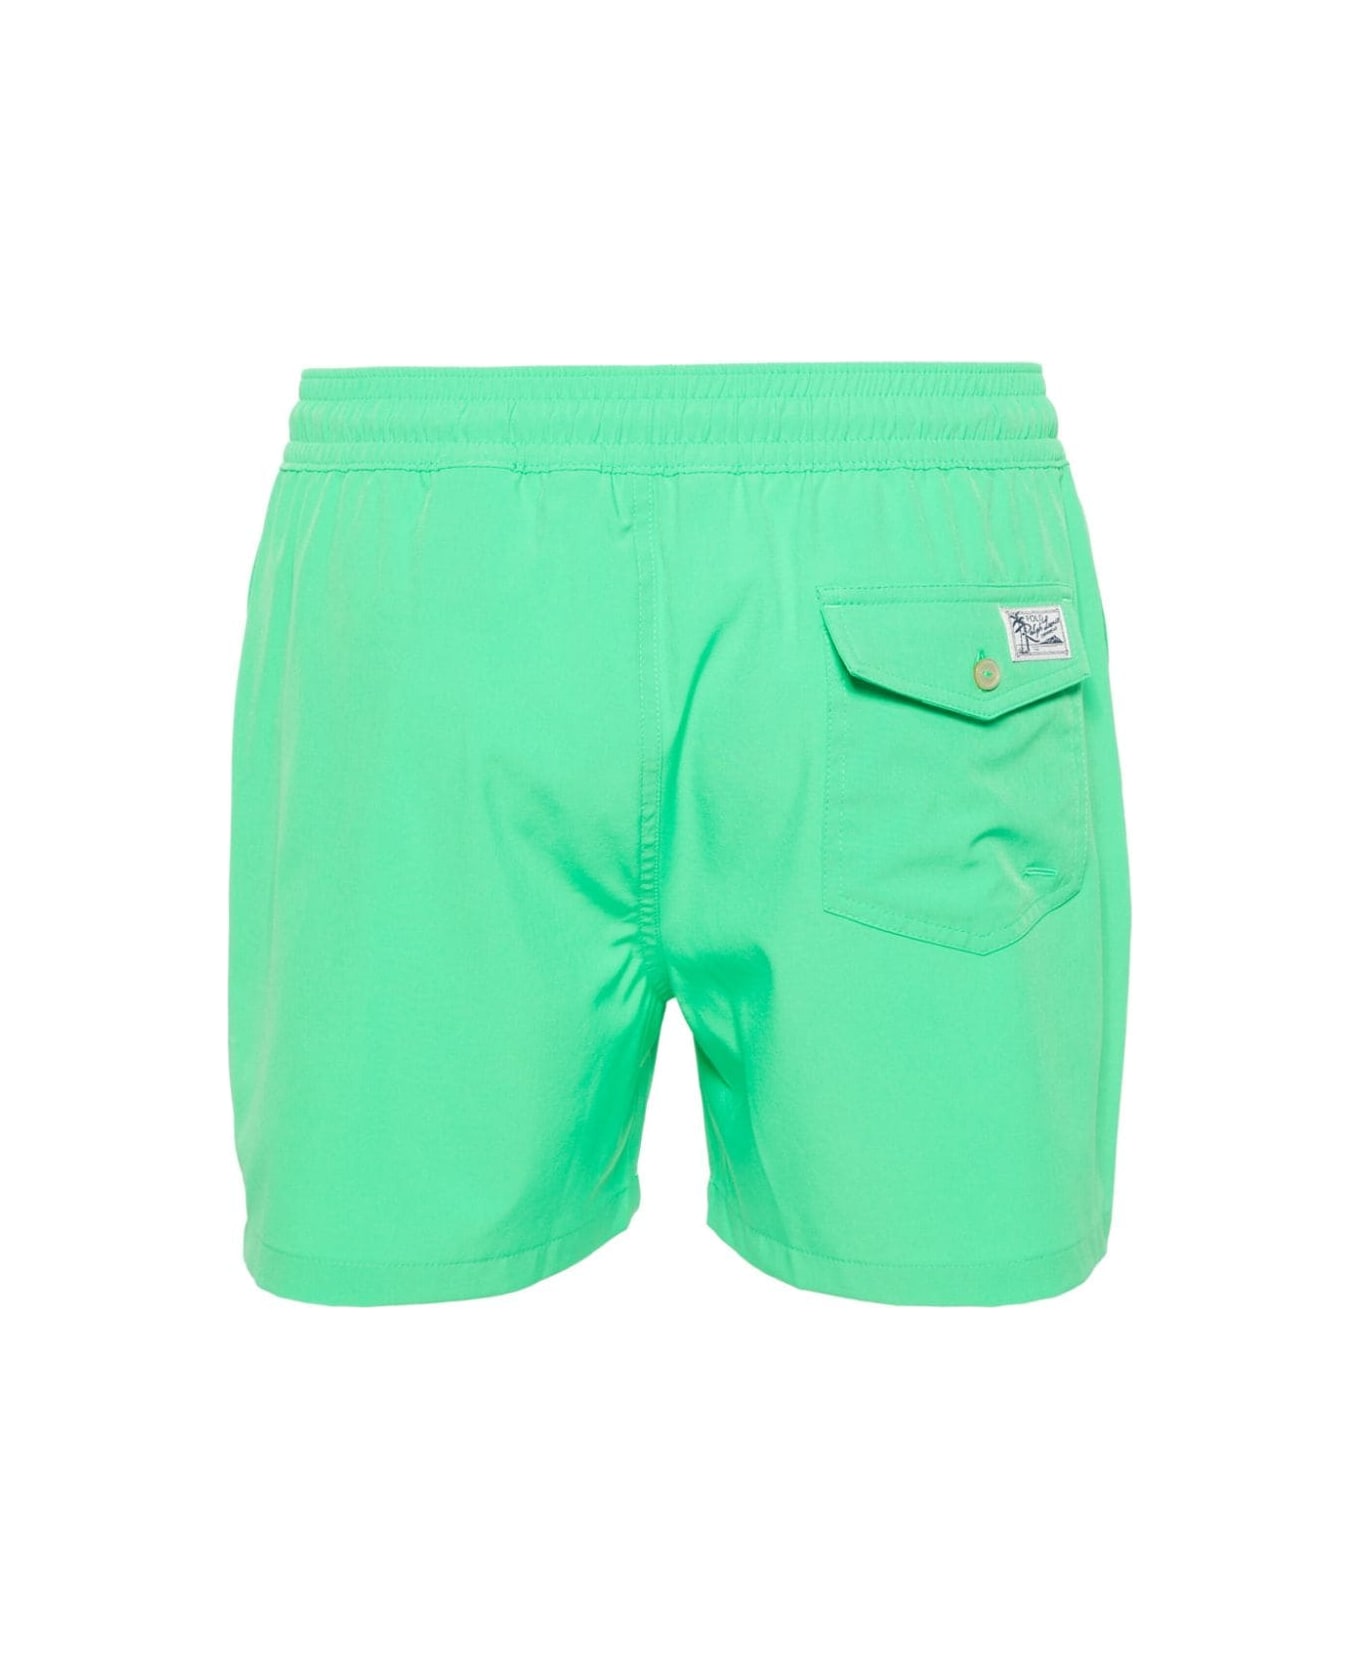 Ralph Lauren Green Swim Shorts With Embroidered Pony - Green